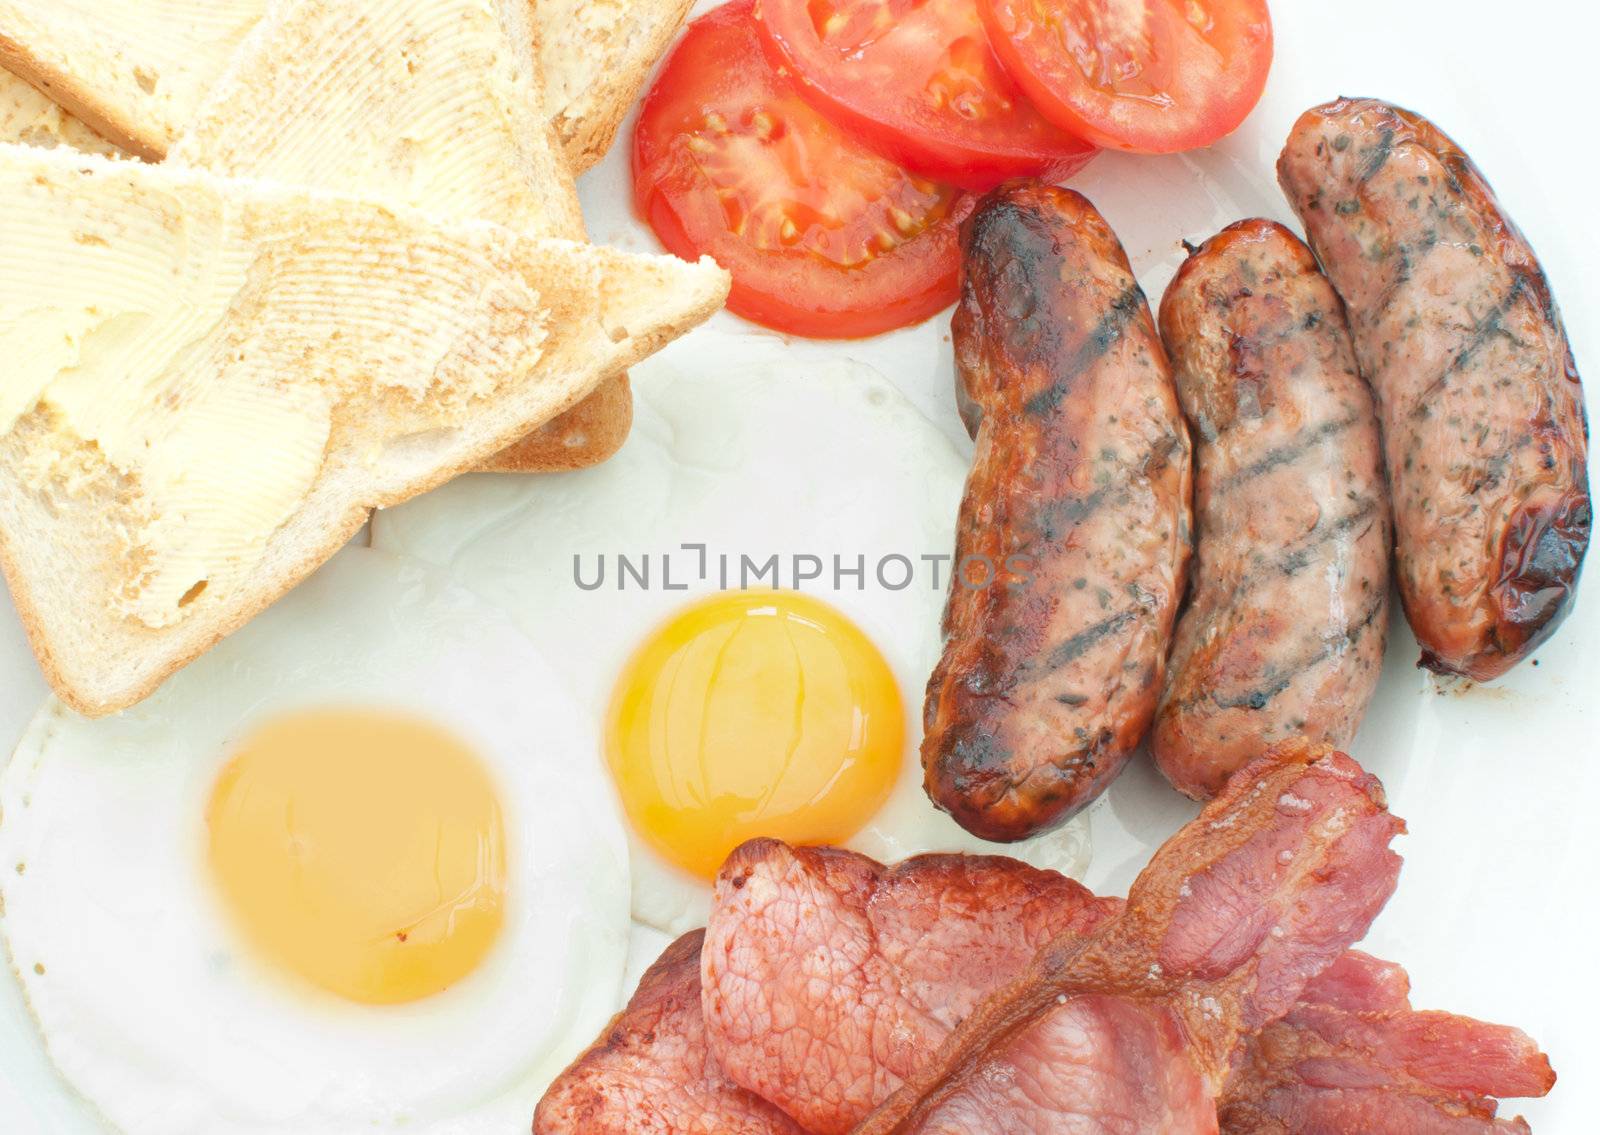 Closeup of a traditional english breakfast fry up with sausages, eggs and bacon